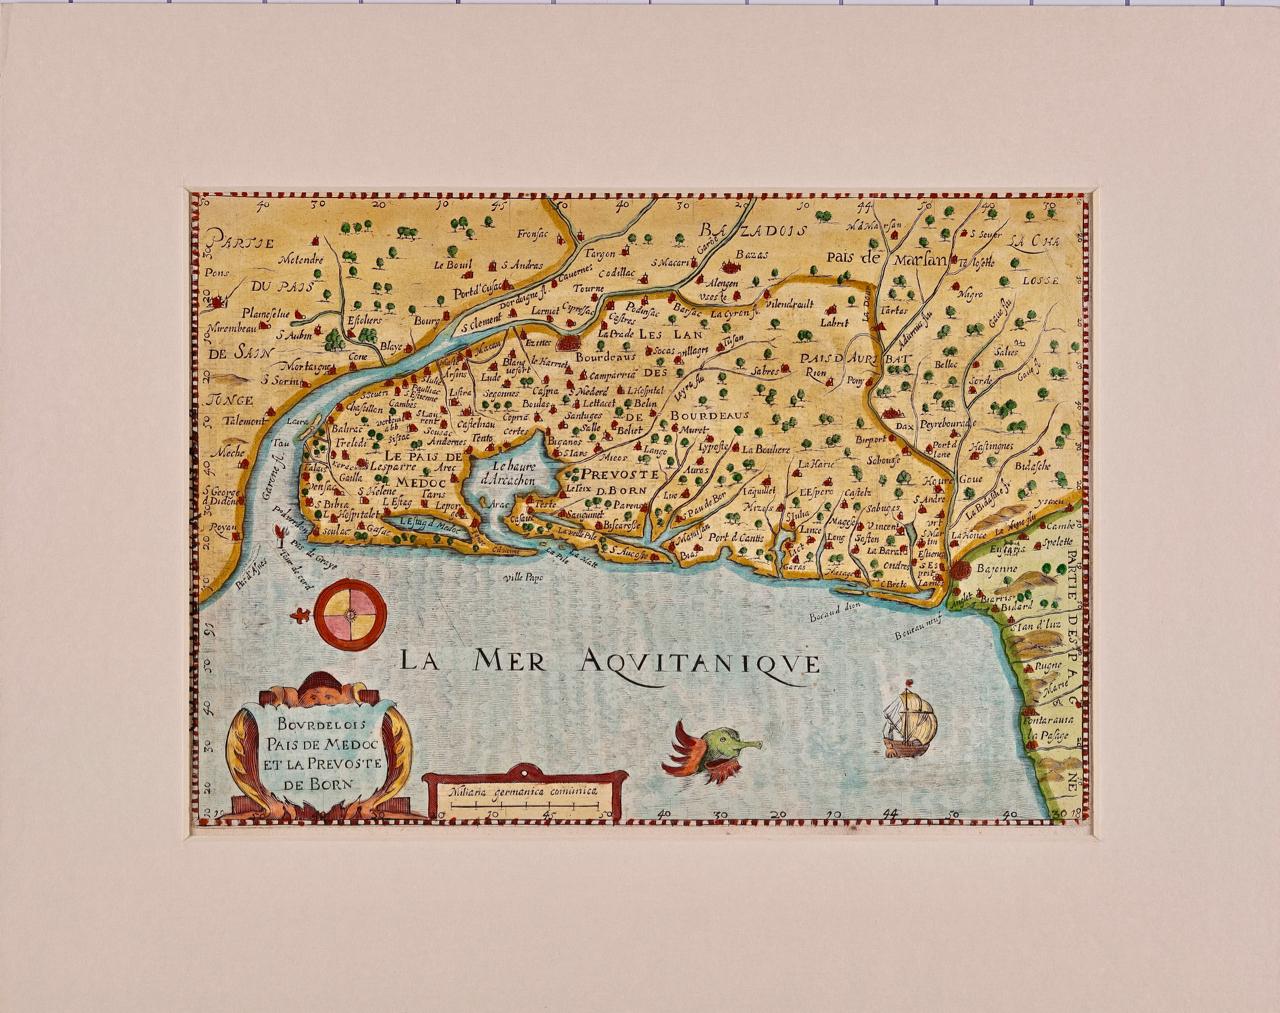 Bordeaux Region of France: A 17th Century Hand-Colored Map by Mercator/Hondius - Print by Gerard Mercator